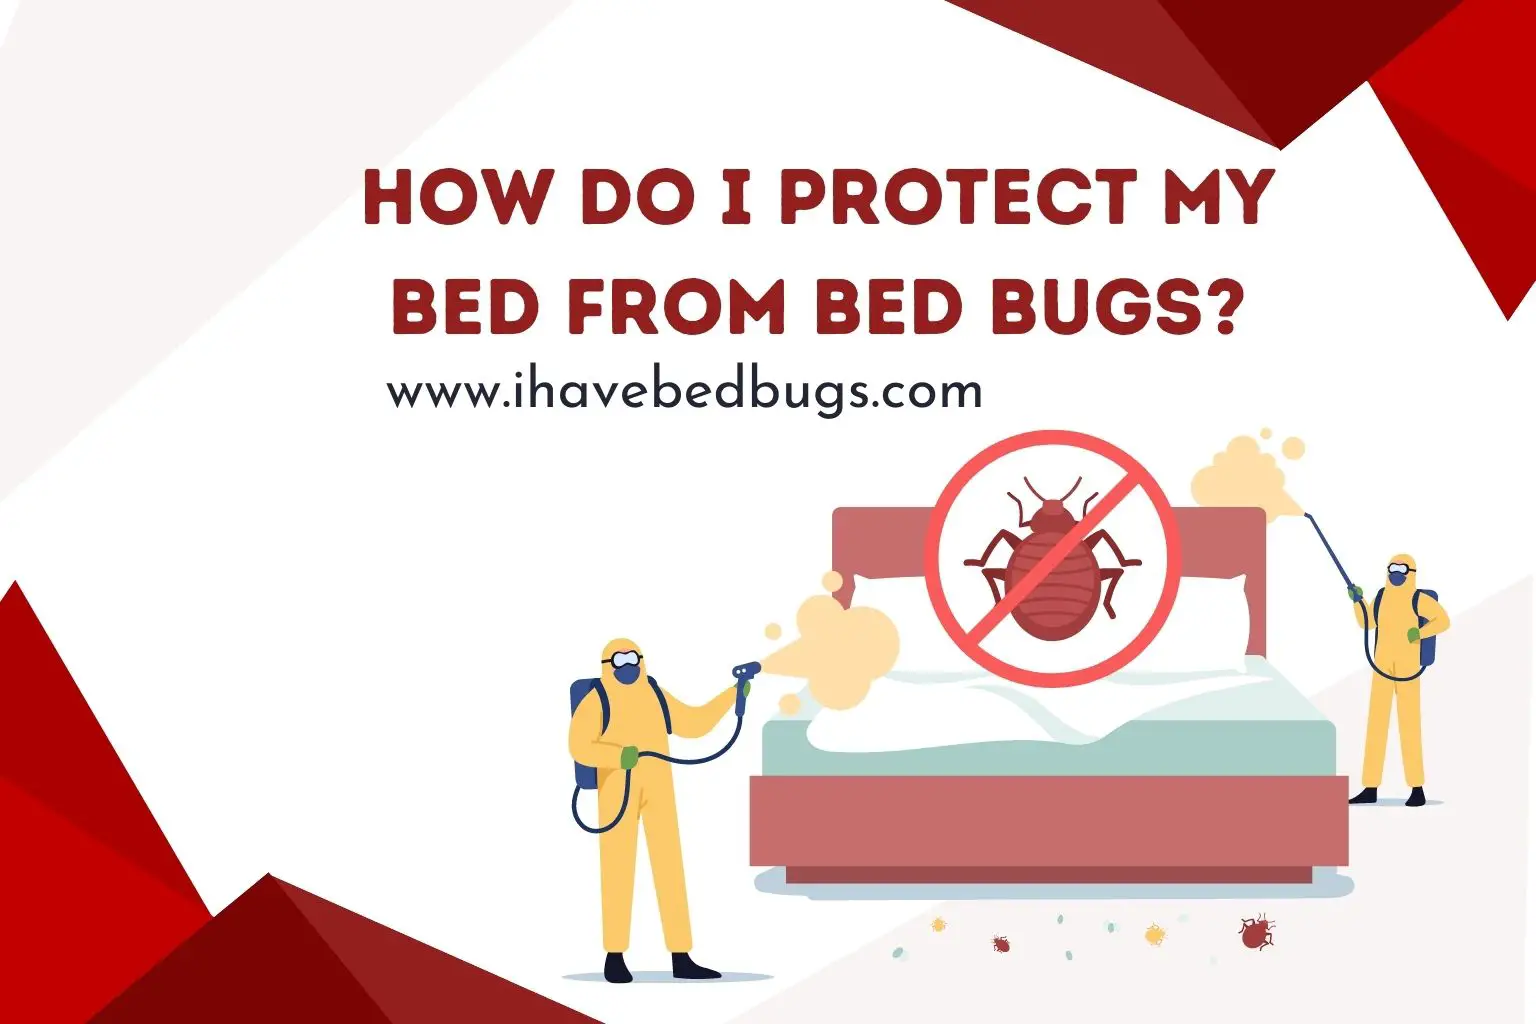 How do I protect my bed from bed bugs